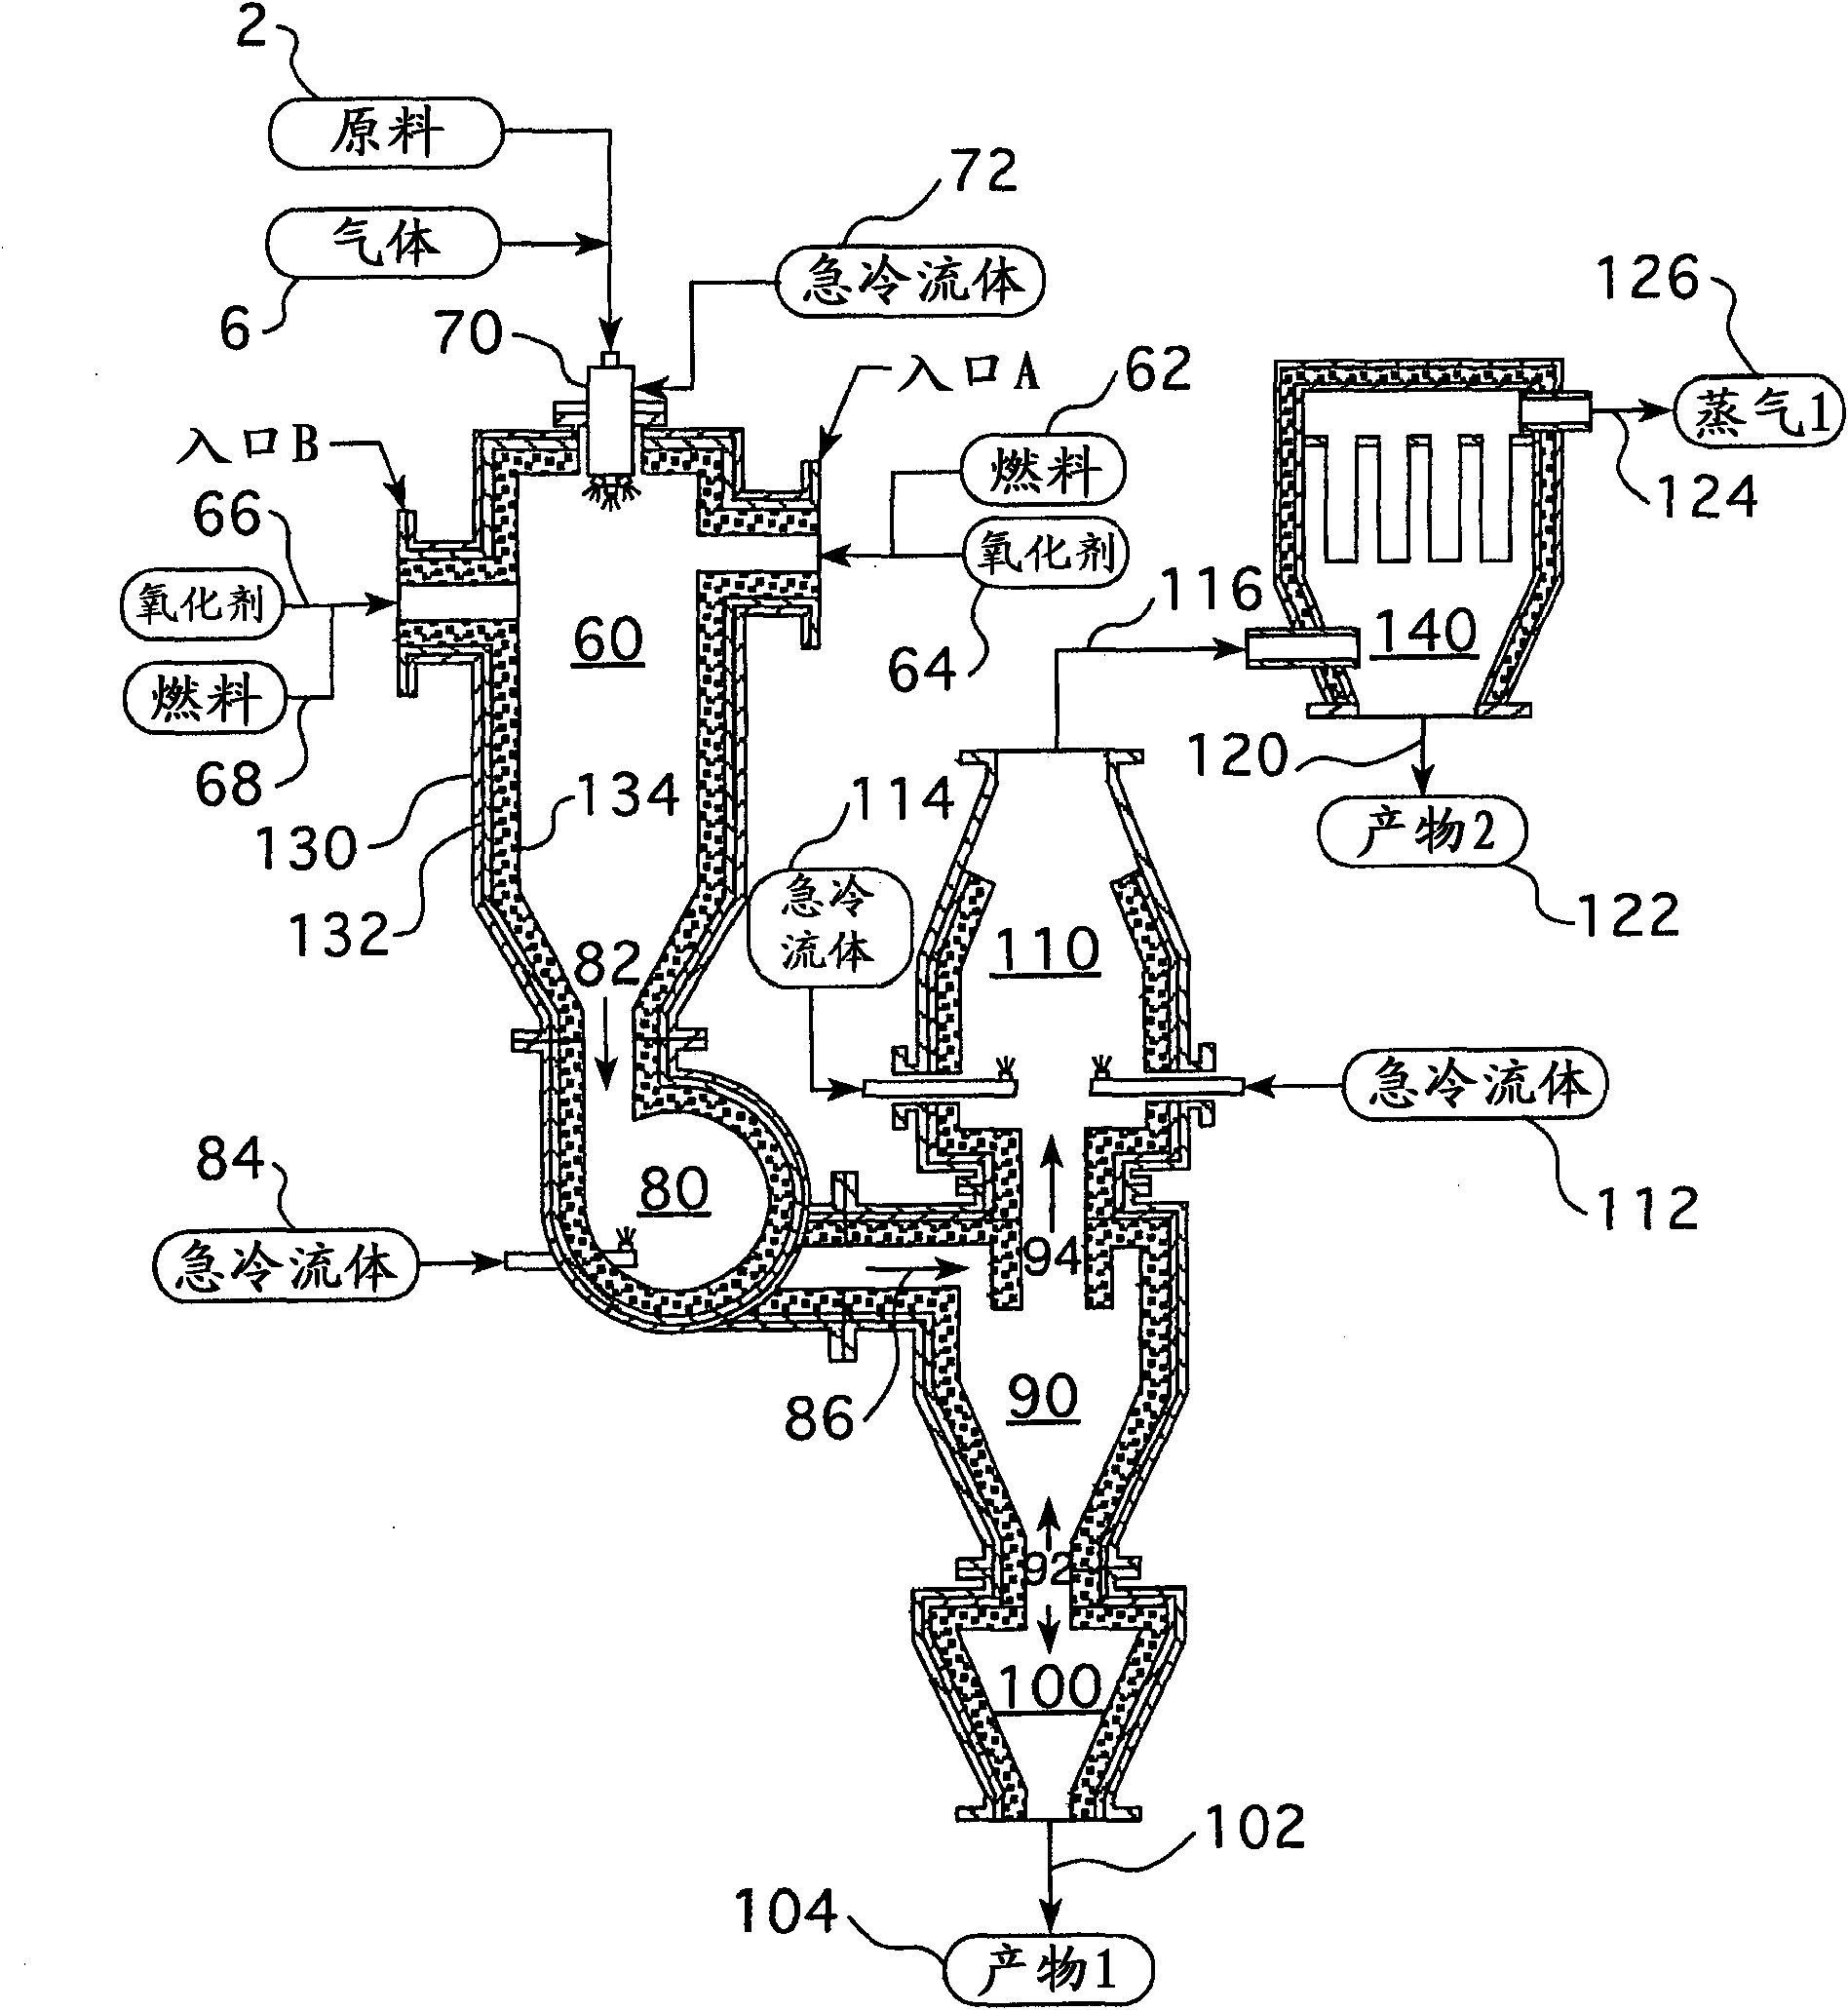 Method and apparatus for recovery of molybdenum from spent catalysts